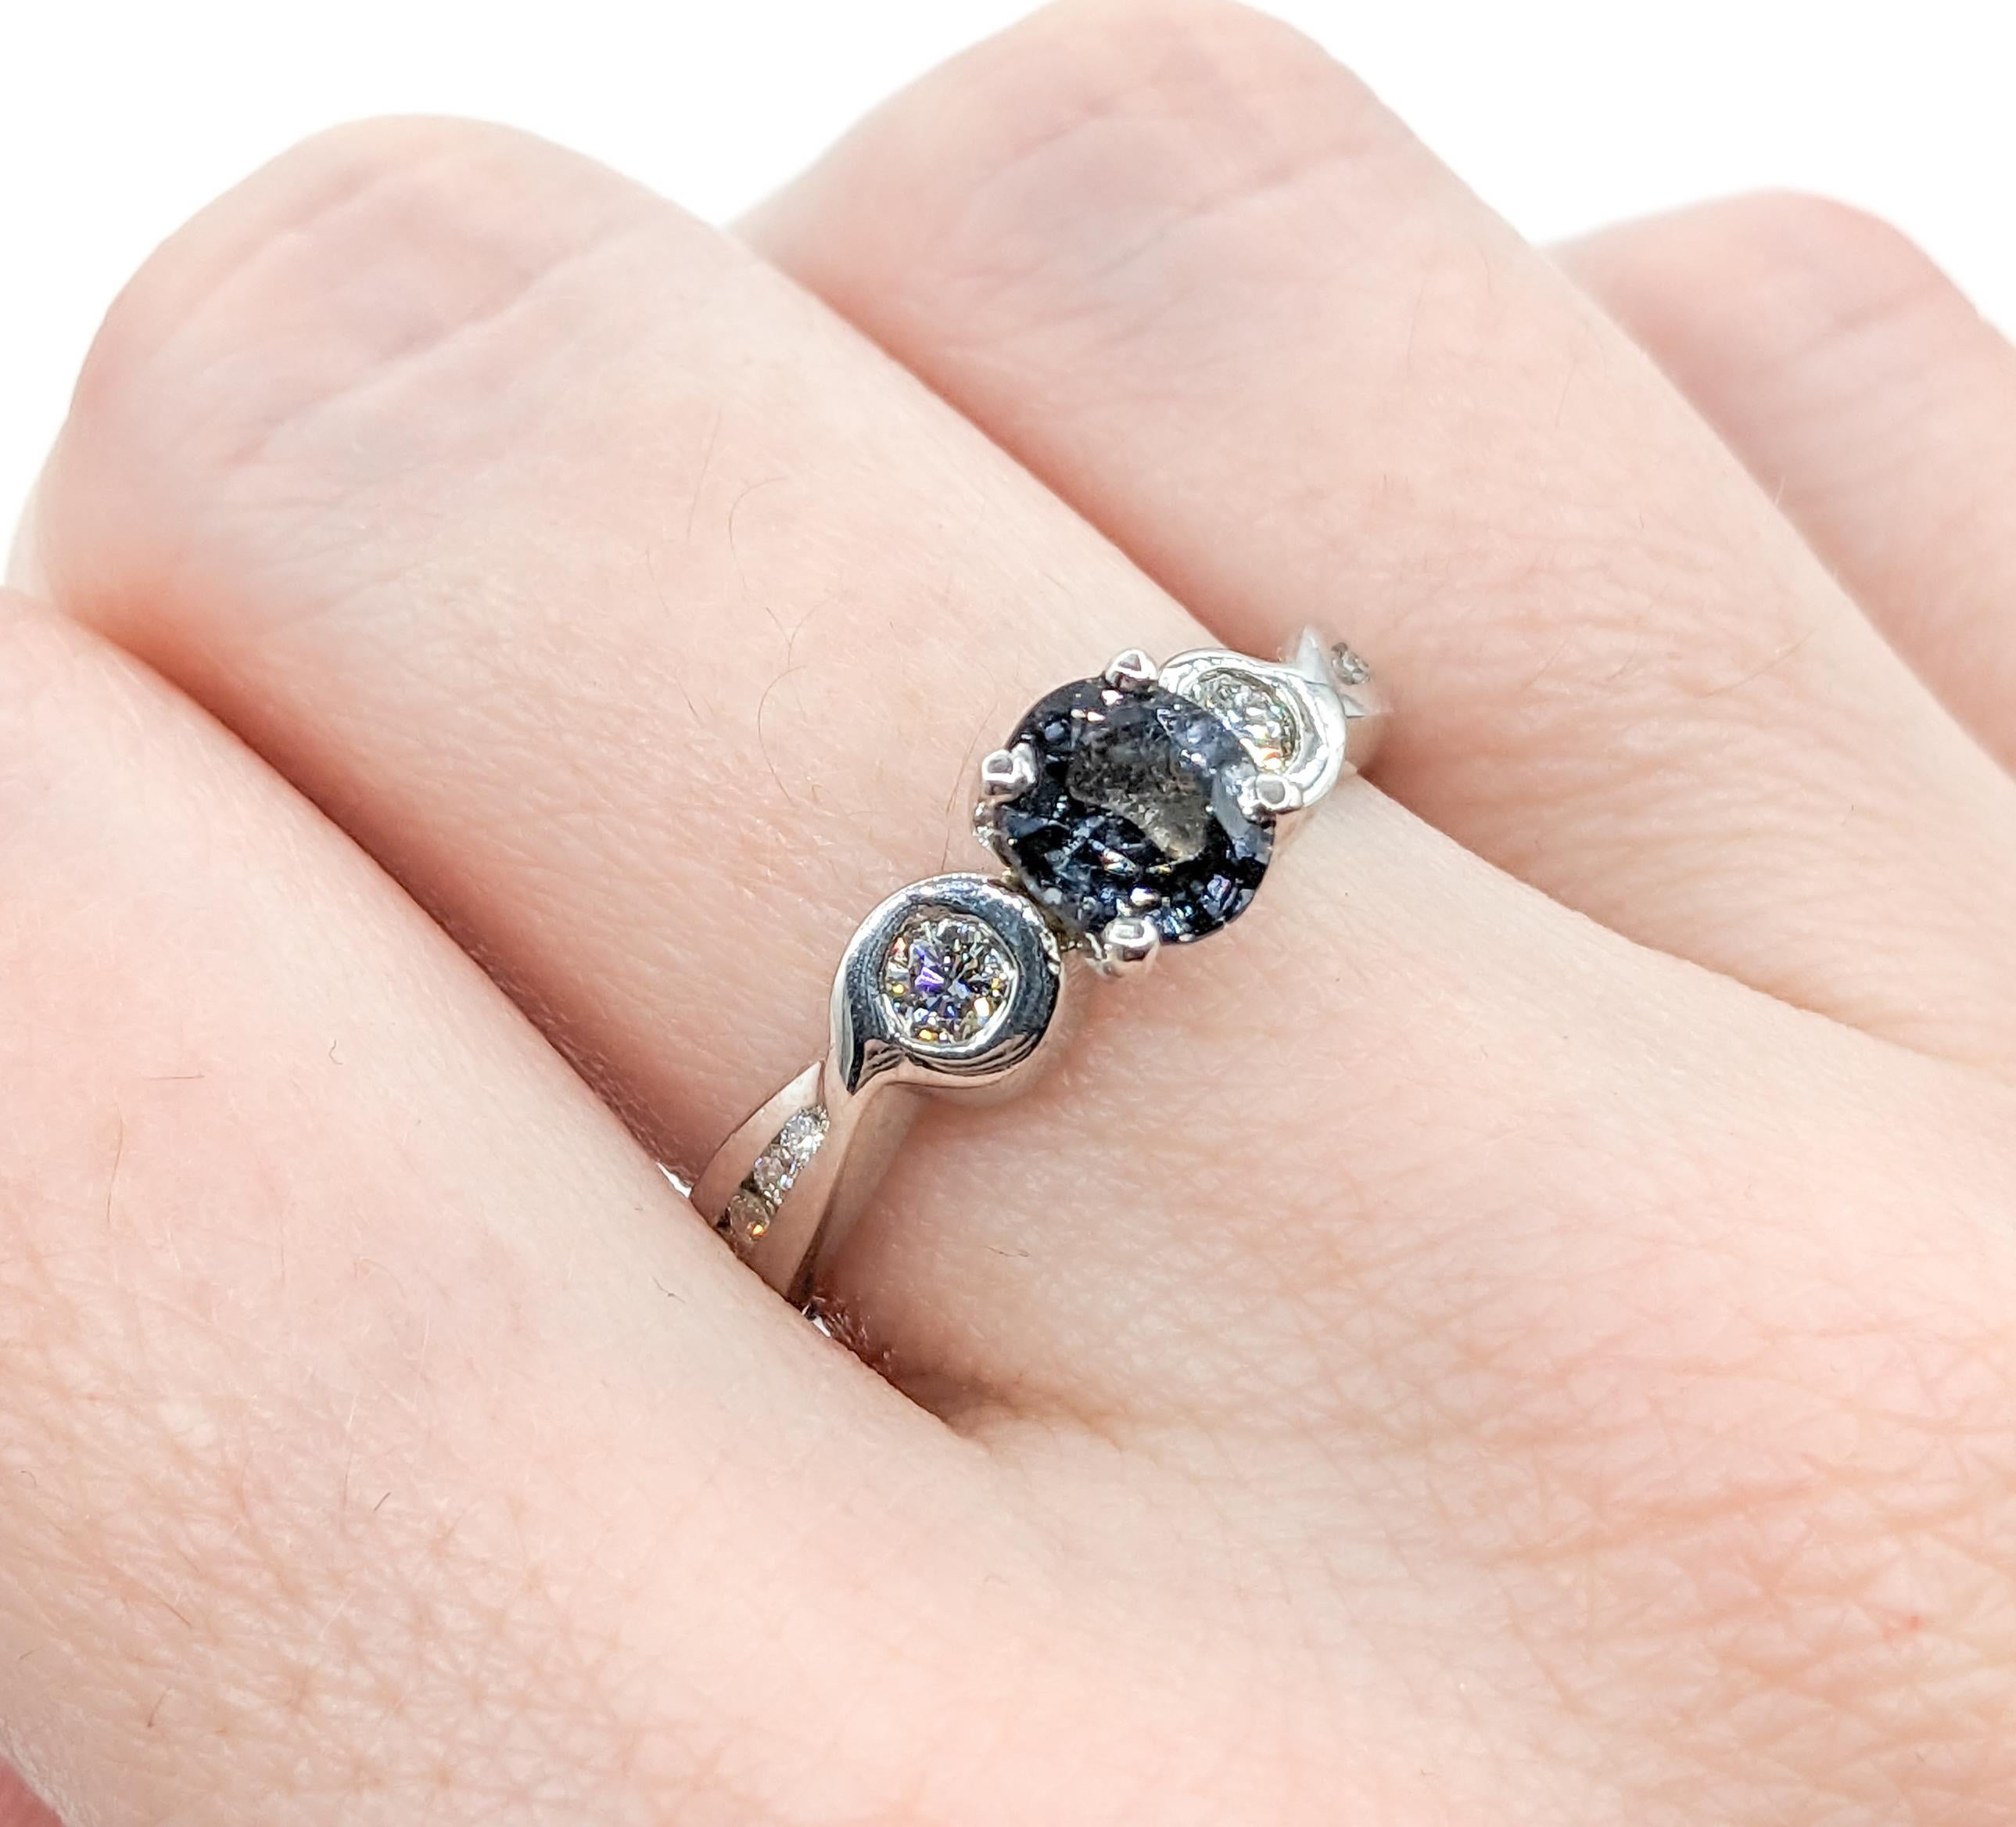 .86ct Grey Spinel & Diamonds Ring In White Gold

Introducing our exquisite ring, masterfully crafted in 14kt white gold, showcasing a stunning combination of .33ctw of brilliant diamonds and a .86ct grey spinel. This ring celebrates a cool grey